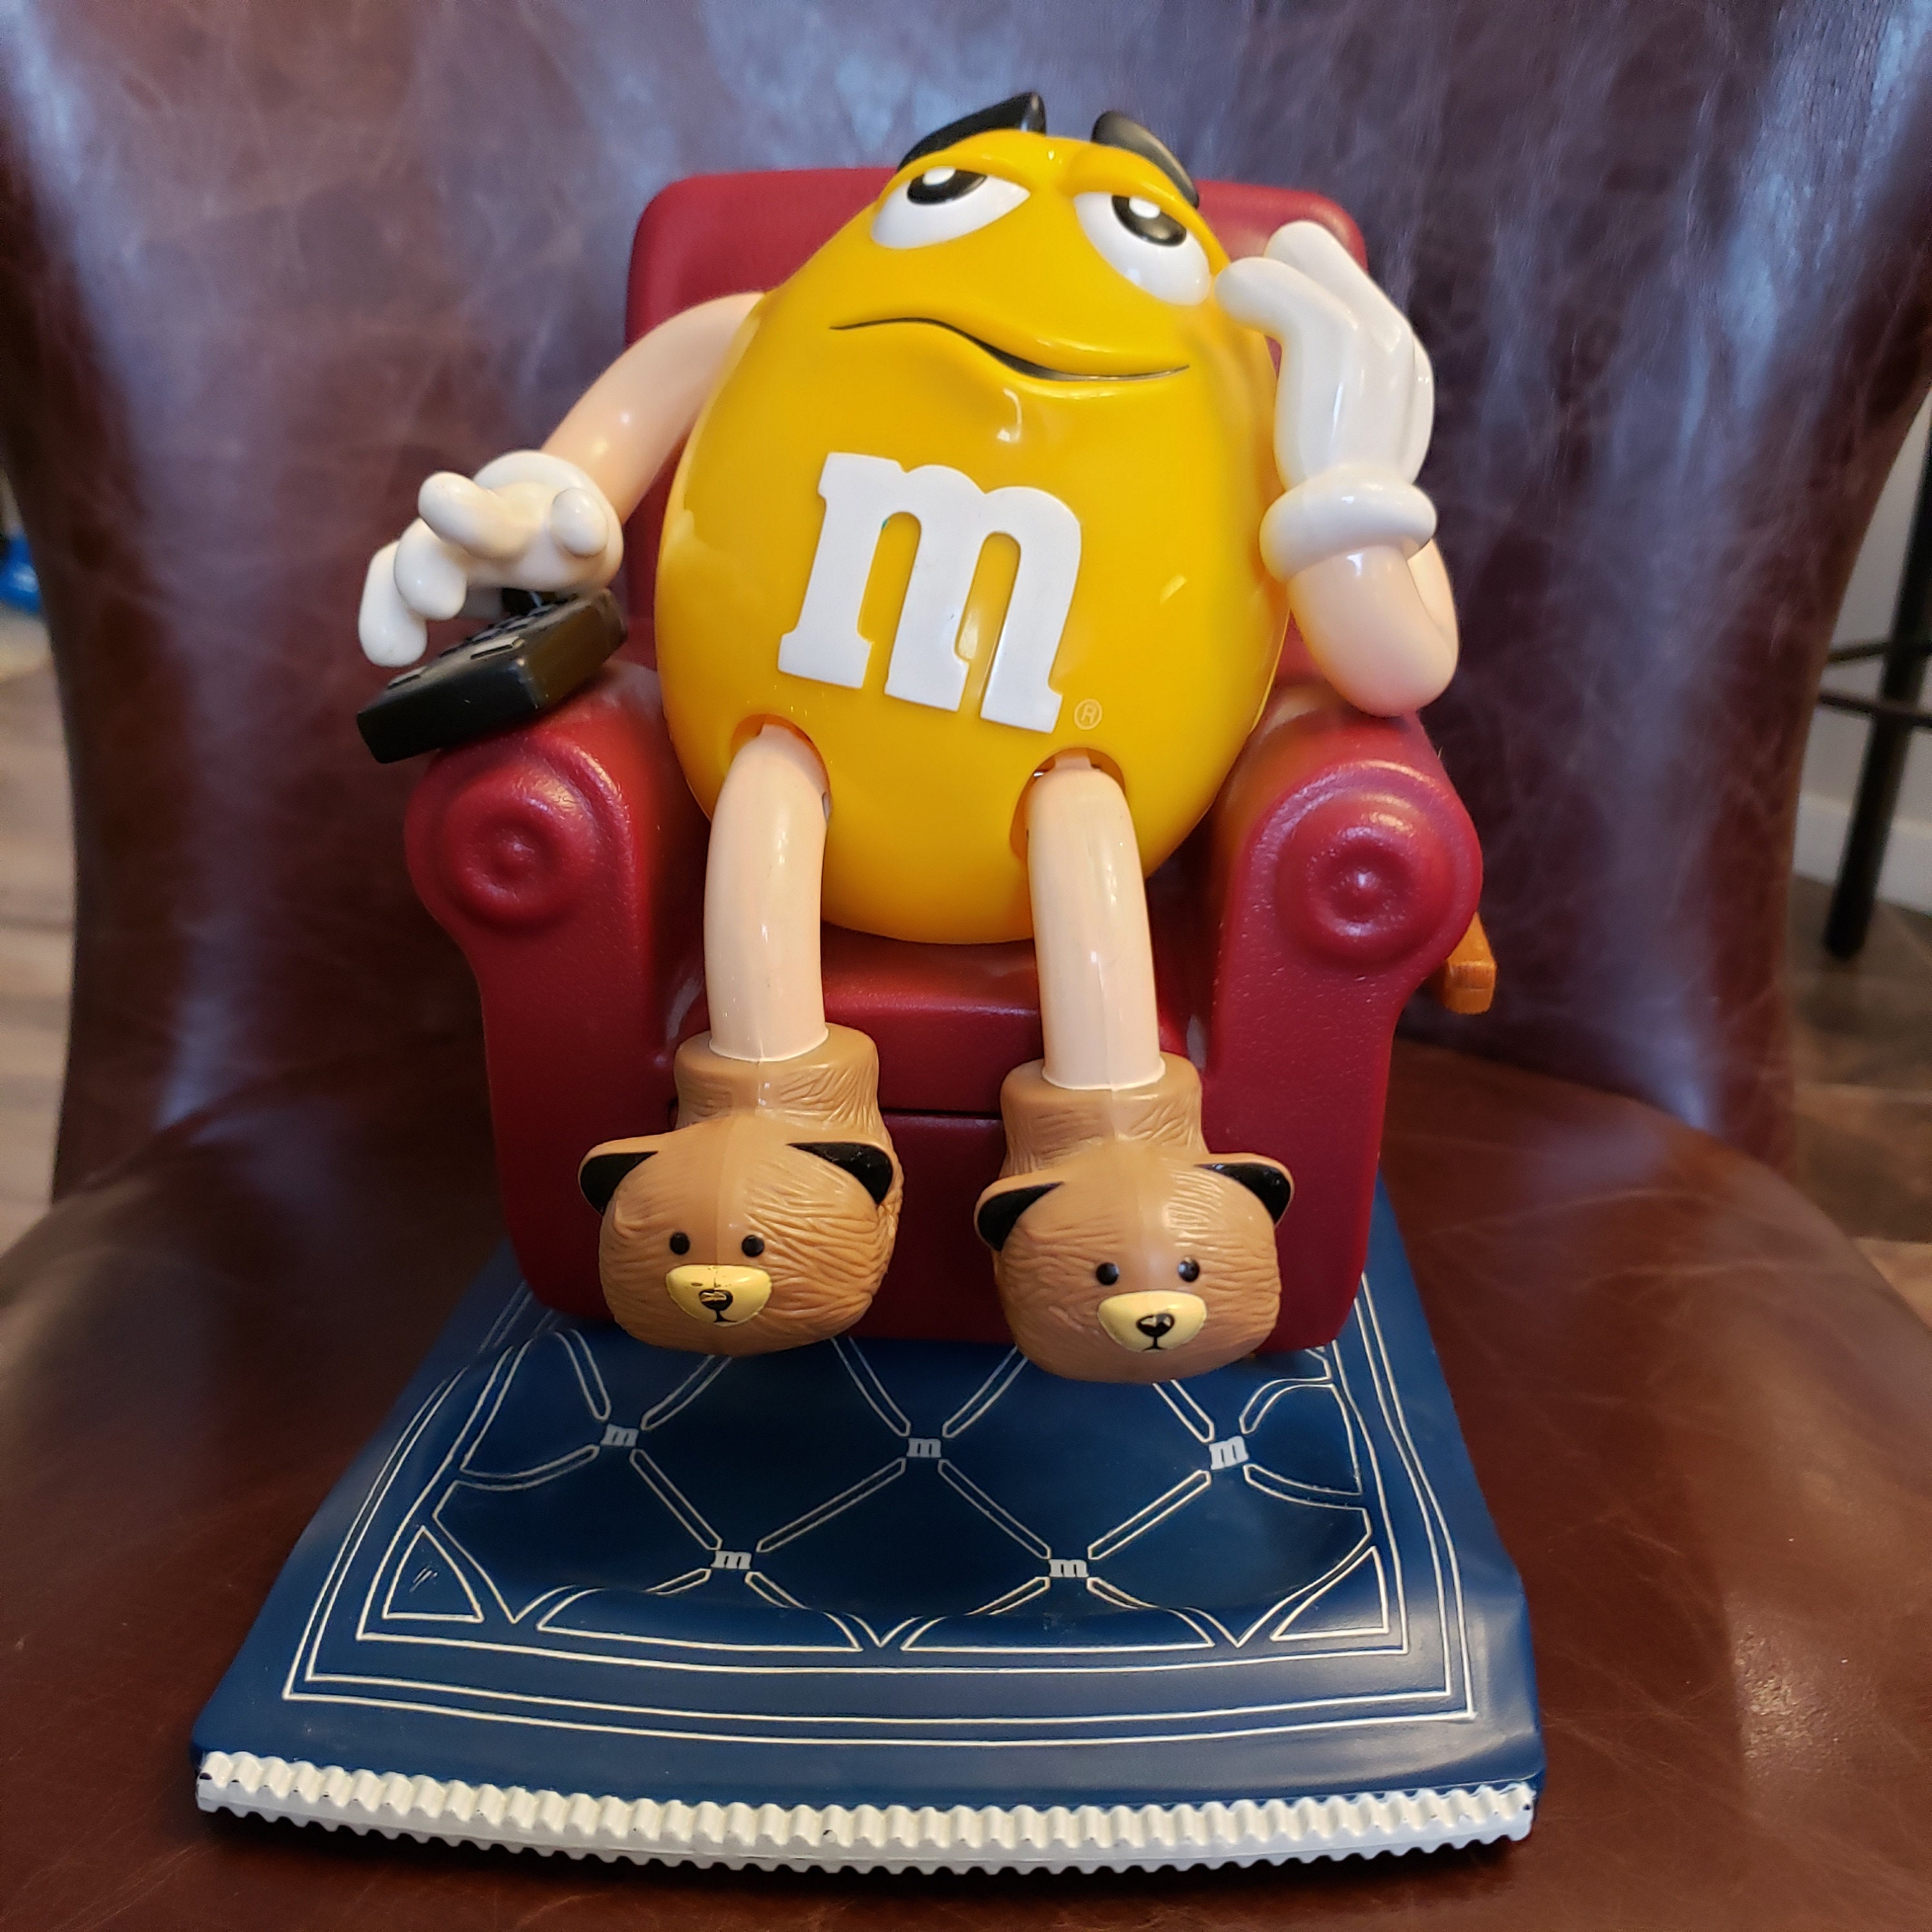 The Making of the M&M's Characters, Advertising's Classic Comedic